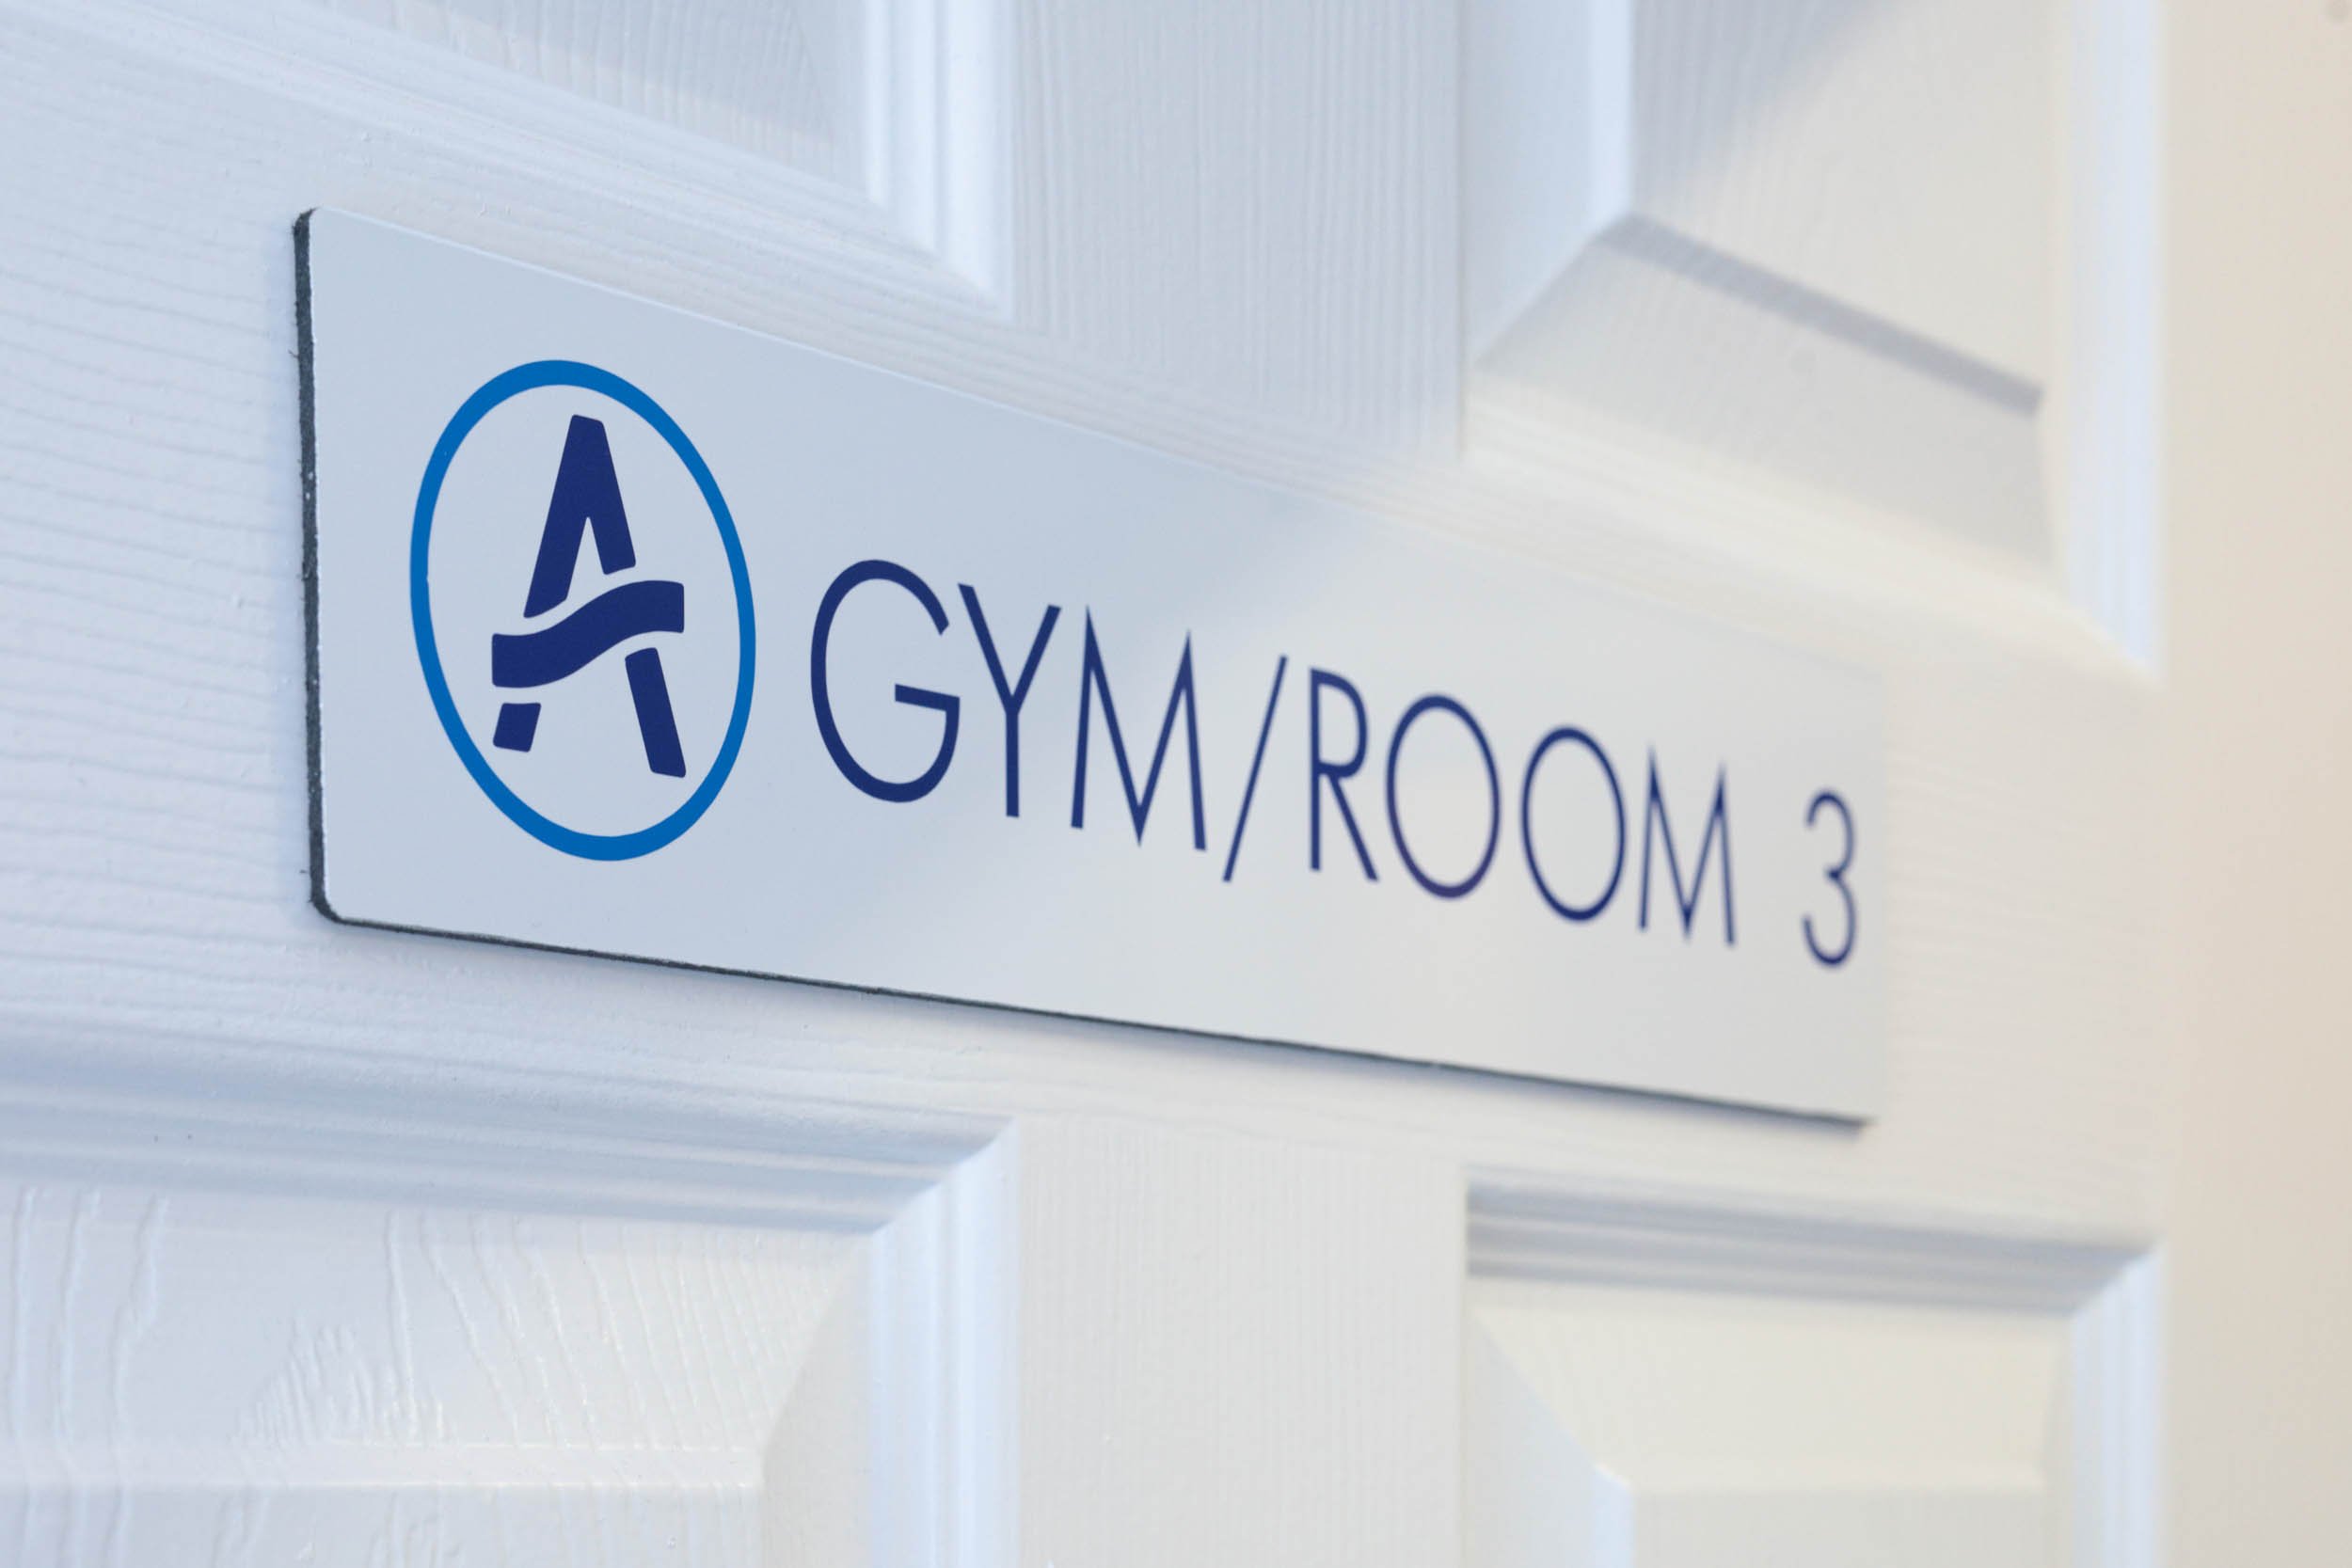 Gym rehabilitation room at Activ Physiotherapy, Totley, Sheffield